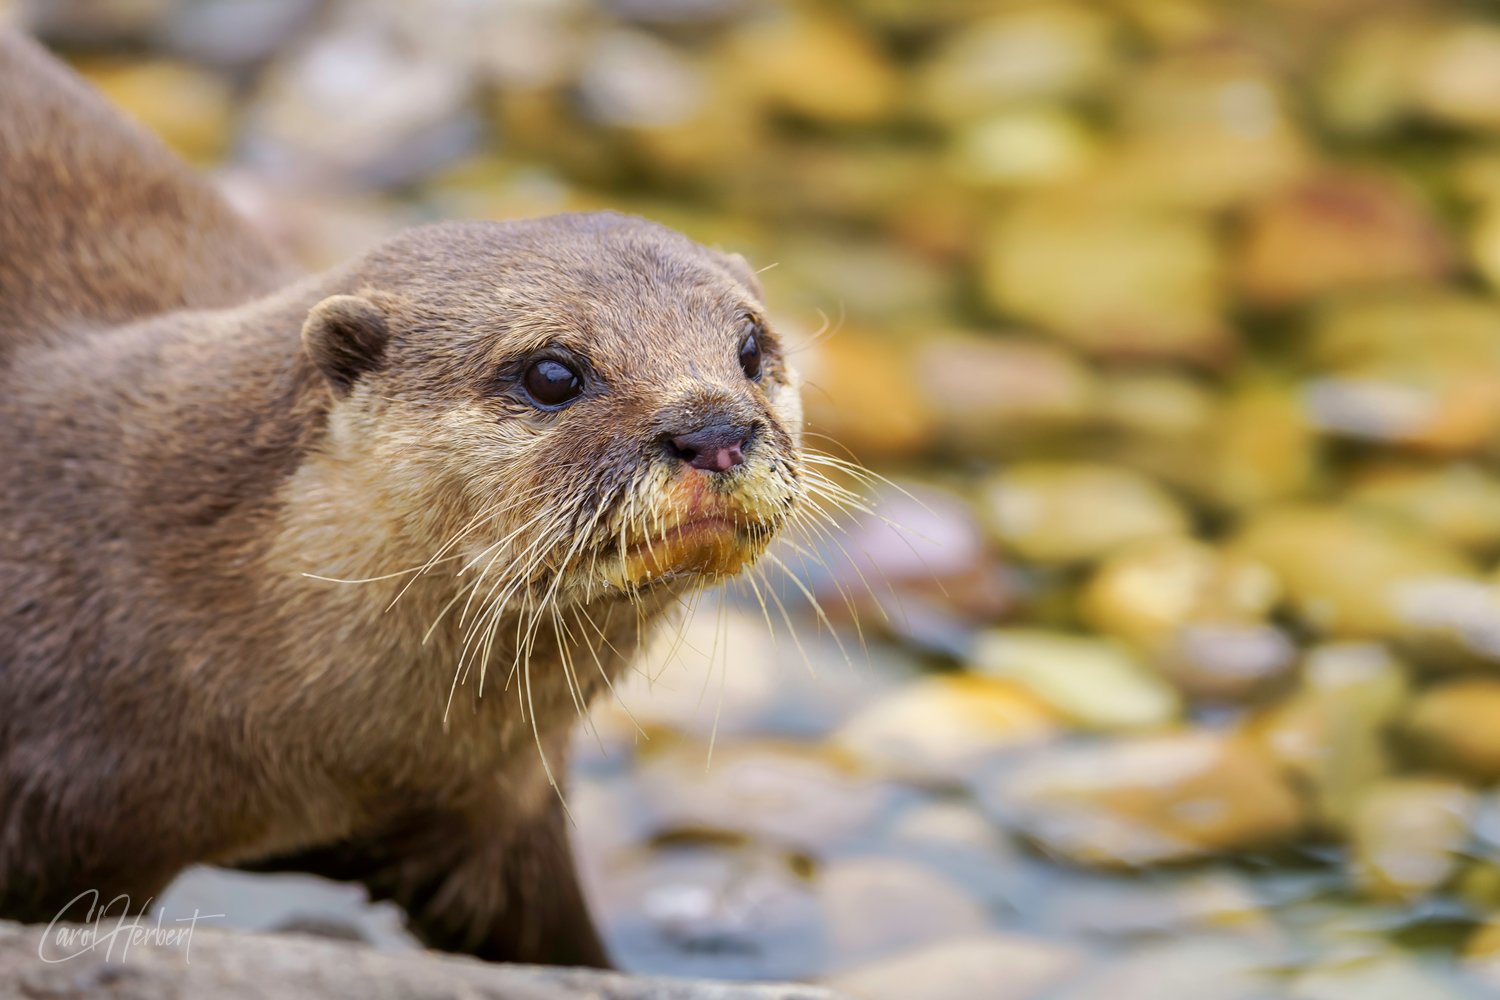 Close up of the head of an otter